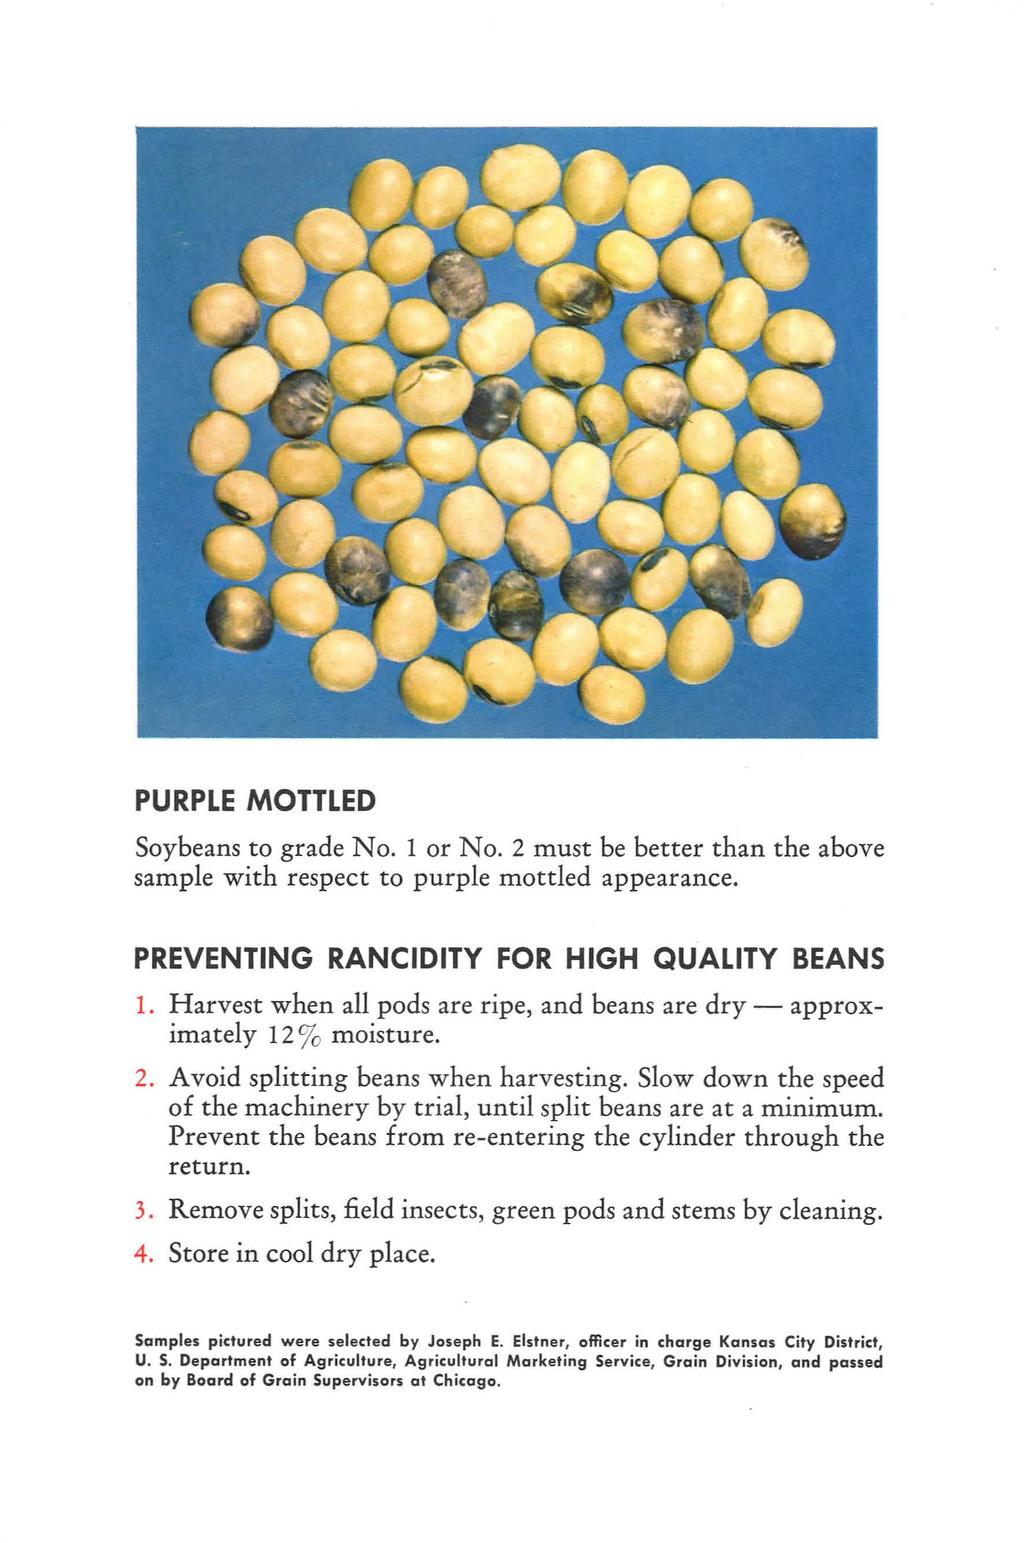 PURPLE MOTTLED Soybeans to grade No. 1 or No. 2 must be better than the above sample with respect to purple mottled appearance. PREVENTNG RANCDTY FOR HGH QUALTY BEANS 1.